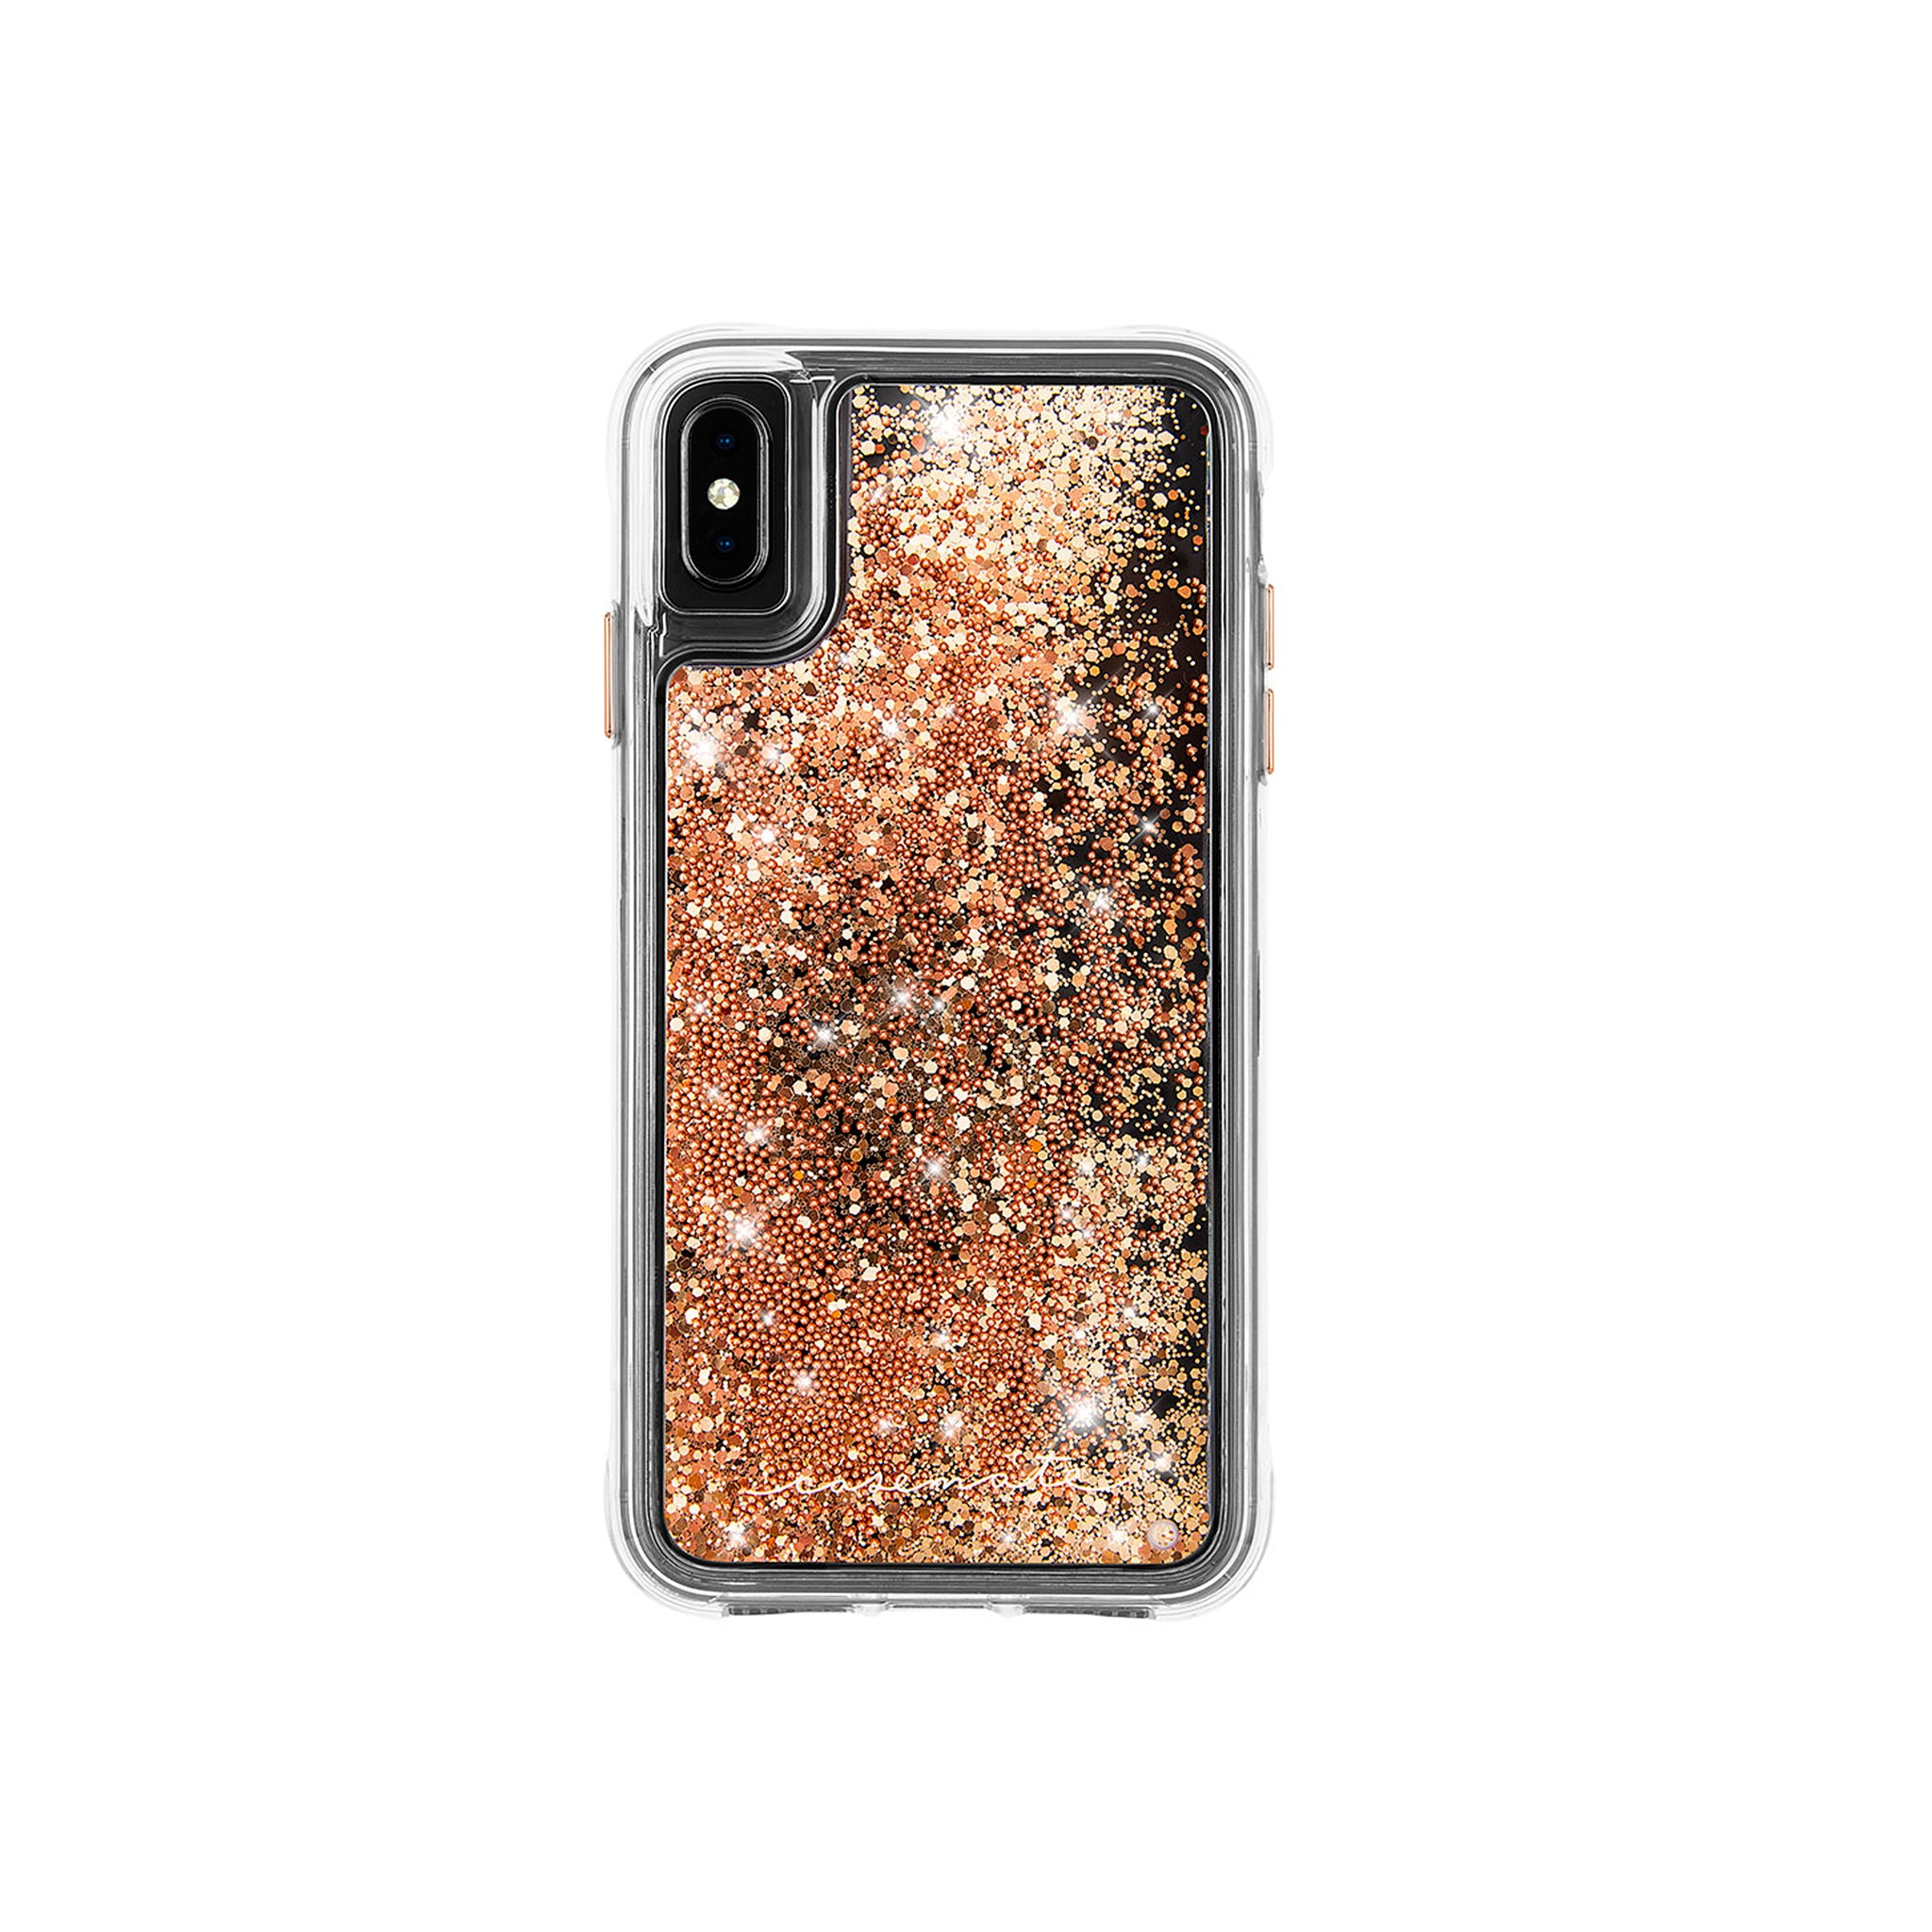 Case-mate - Waterfall Case For Apple iPhone Xs Max - Gold